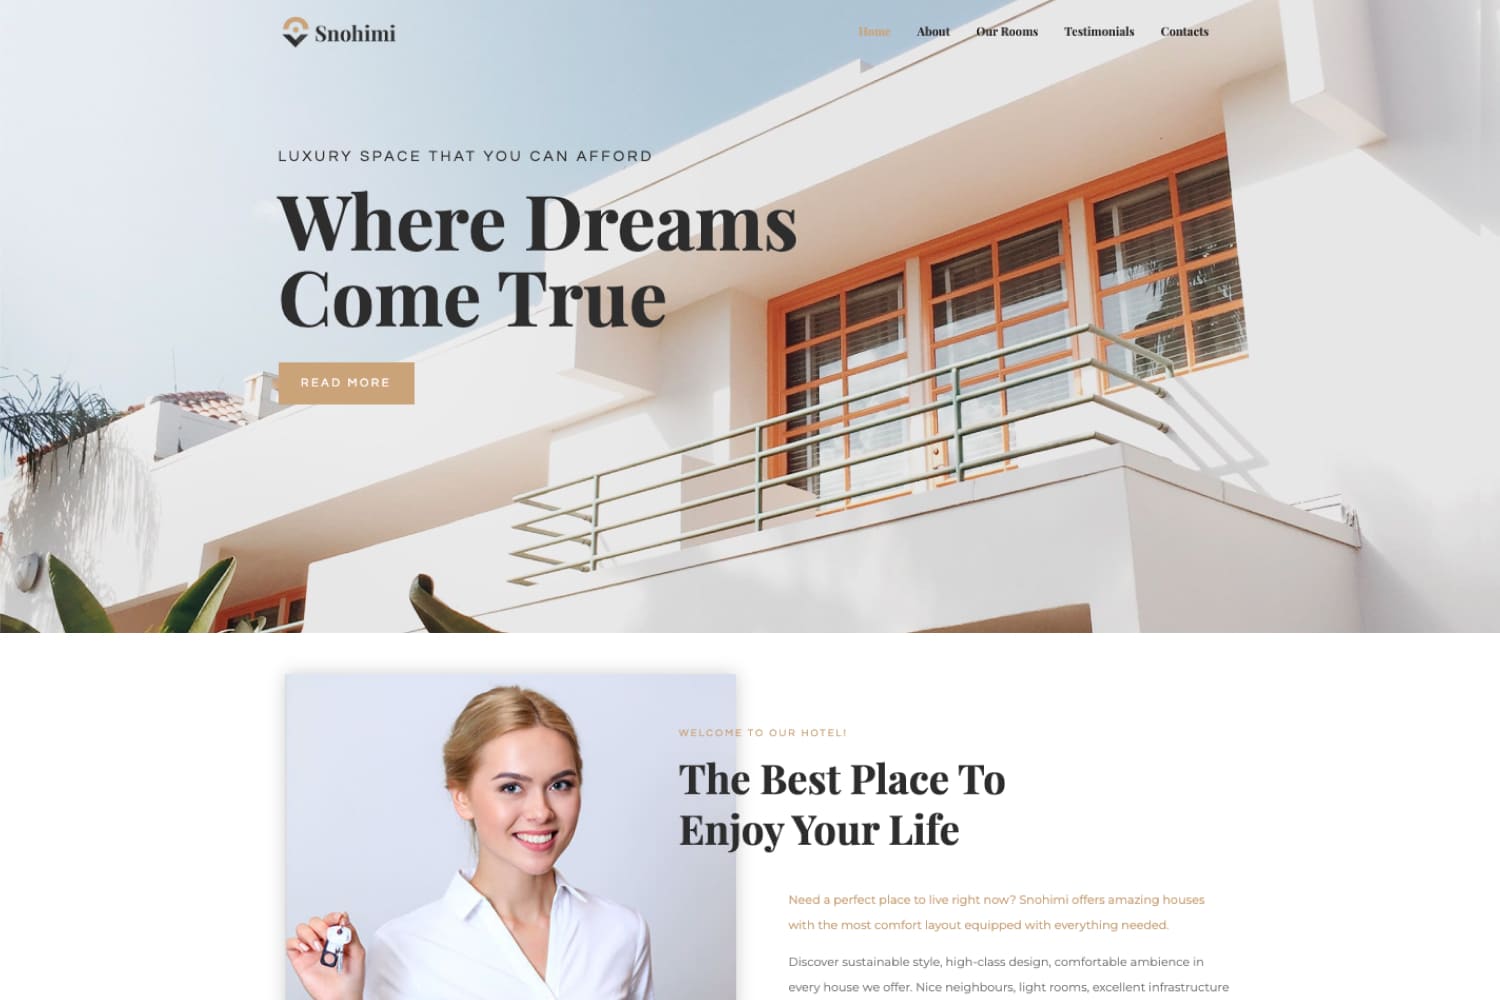 The main page of the hotel website with a photo of a balcony and a girl with keys.